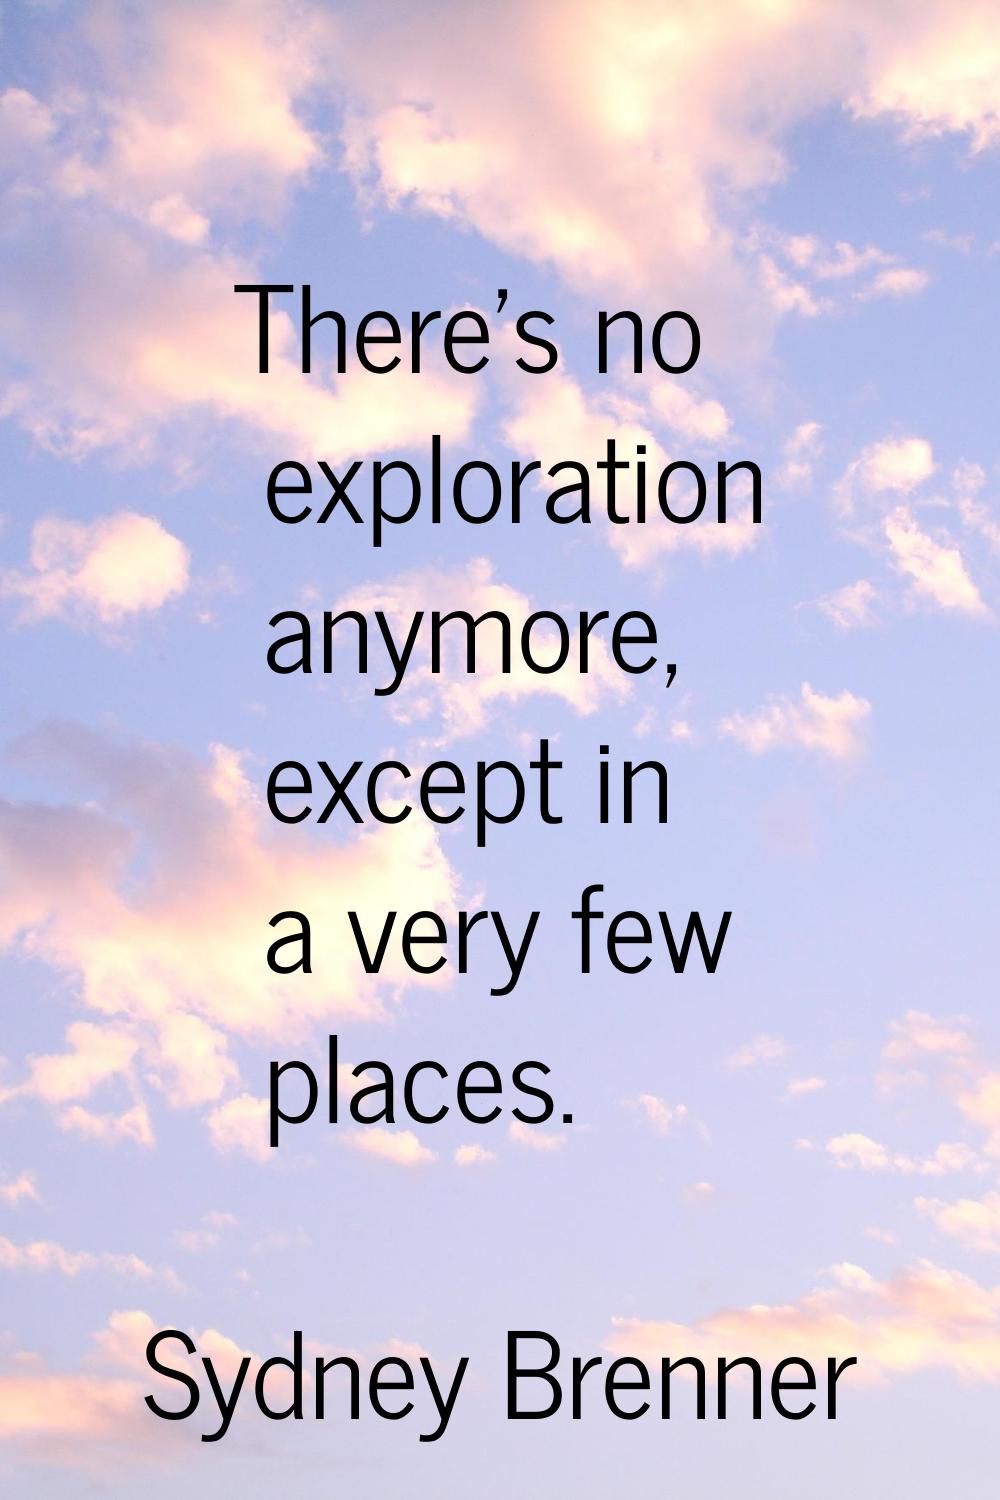 There's no exploration anymore, except in a very few places.